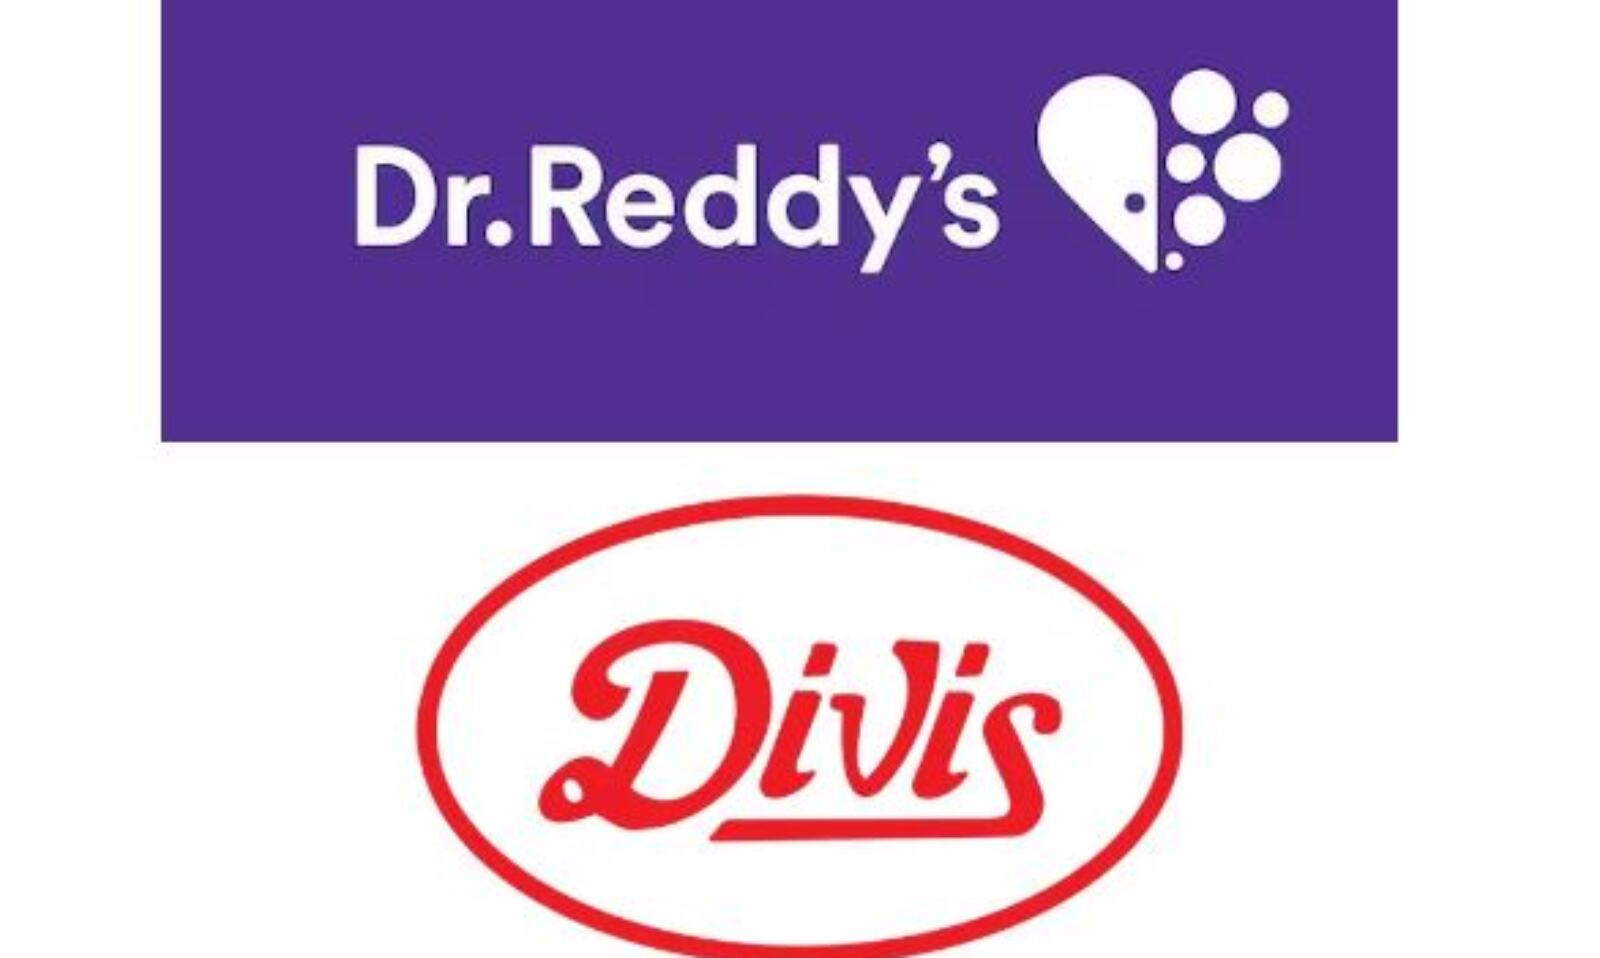 Wockhardt to sell part of branded generic biz to Dr Reddy's for ₹1,850 cr